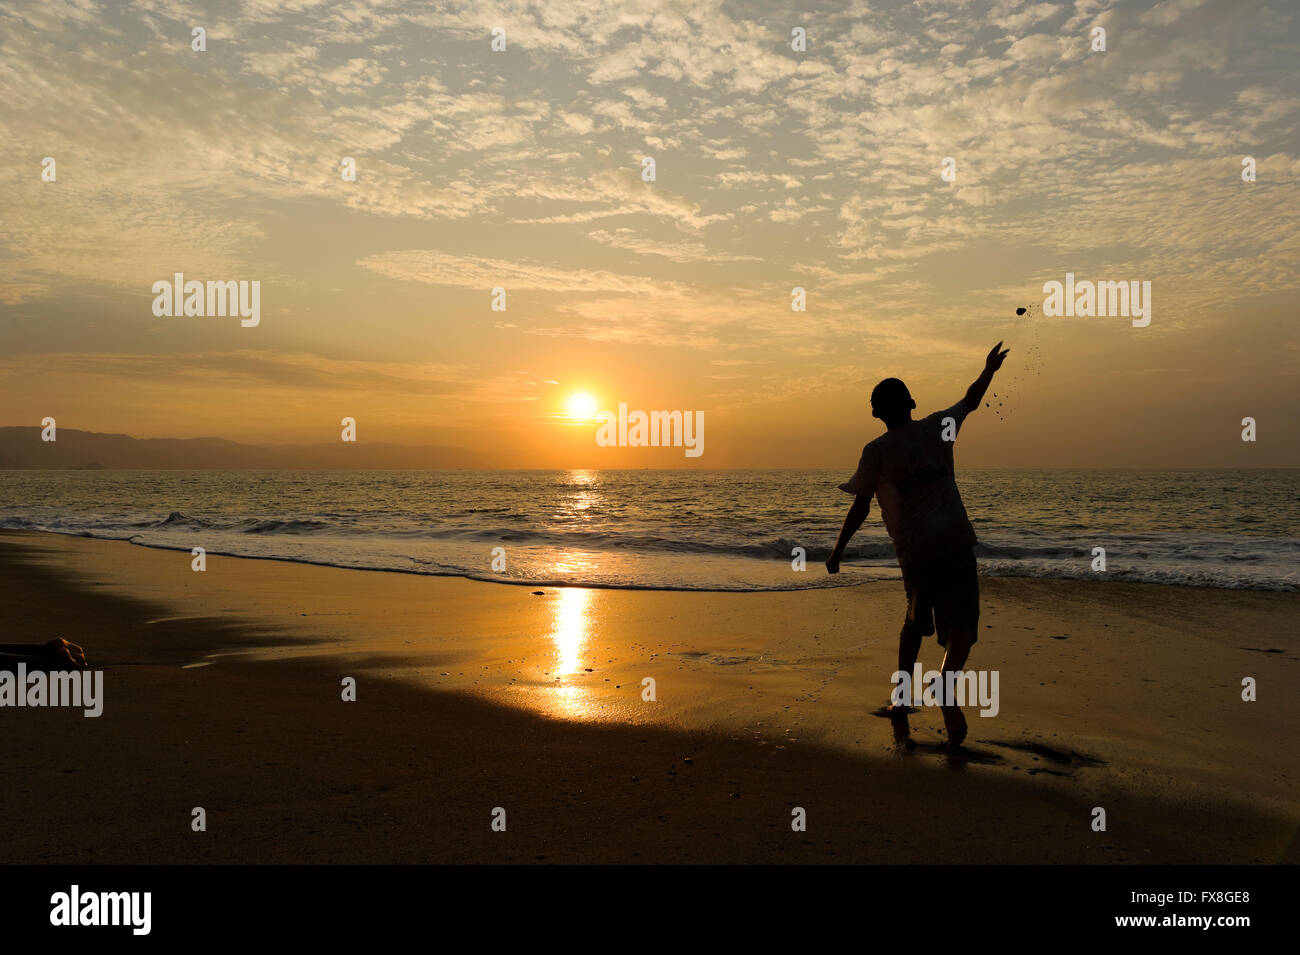 Beach boy is a boy throwing a stone at the the sunset ocean with the sun setting on the horizon. Stock Photo